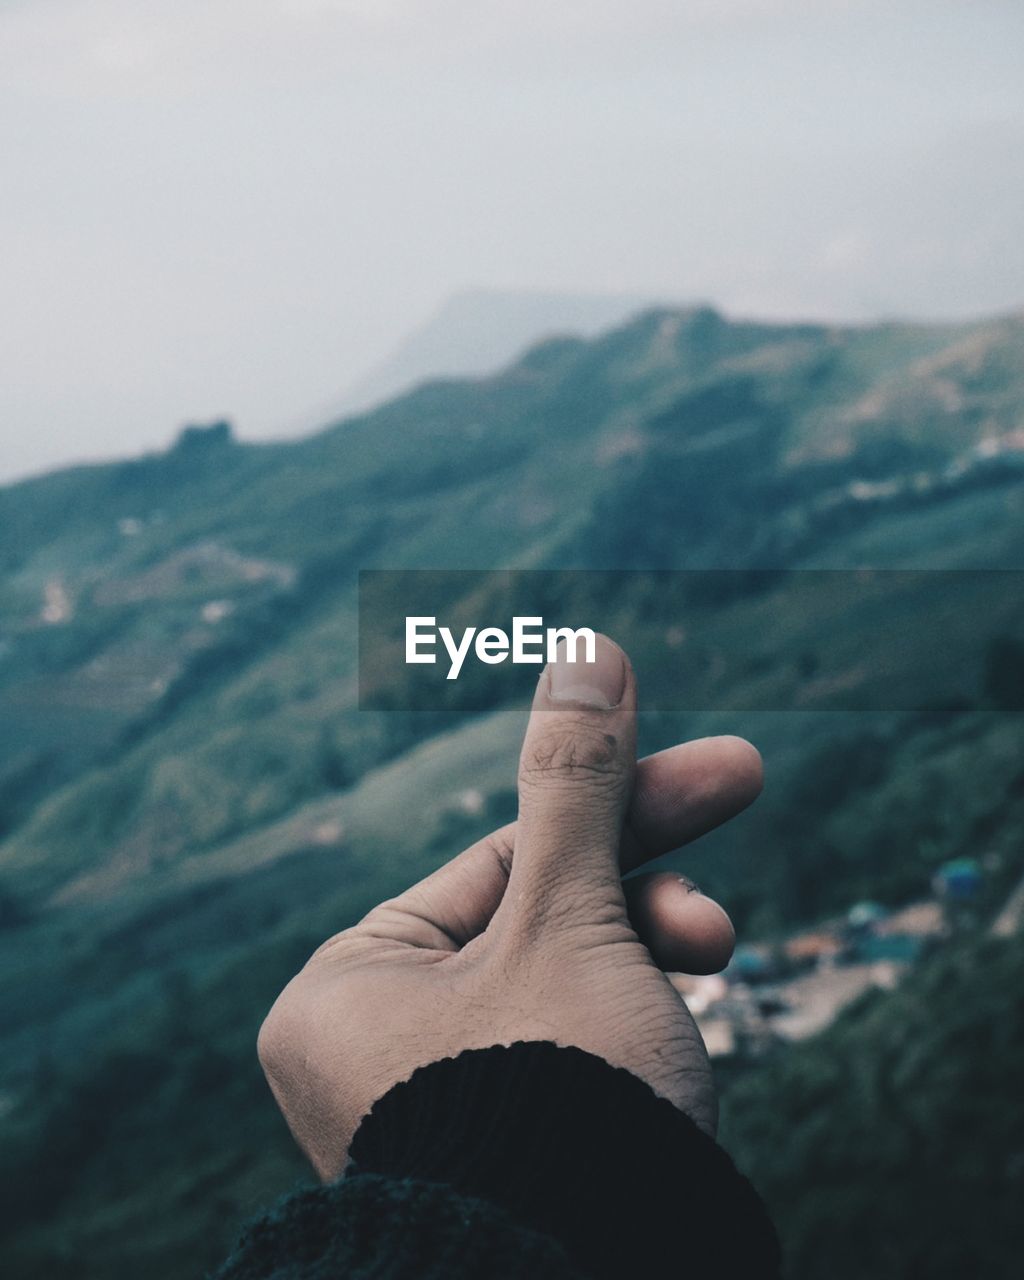 Cropped image of hand snapping fingers against mountains during foggy weather